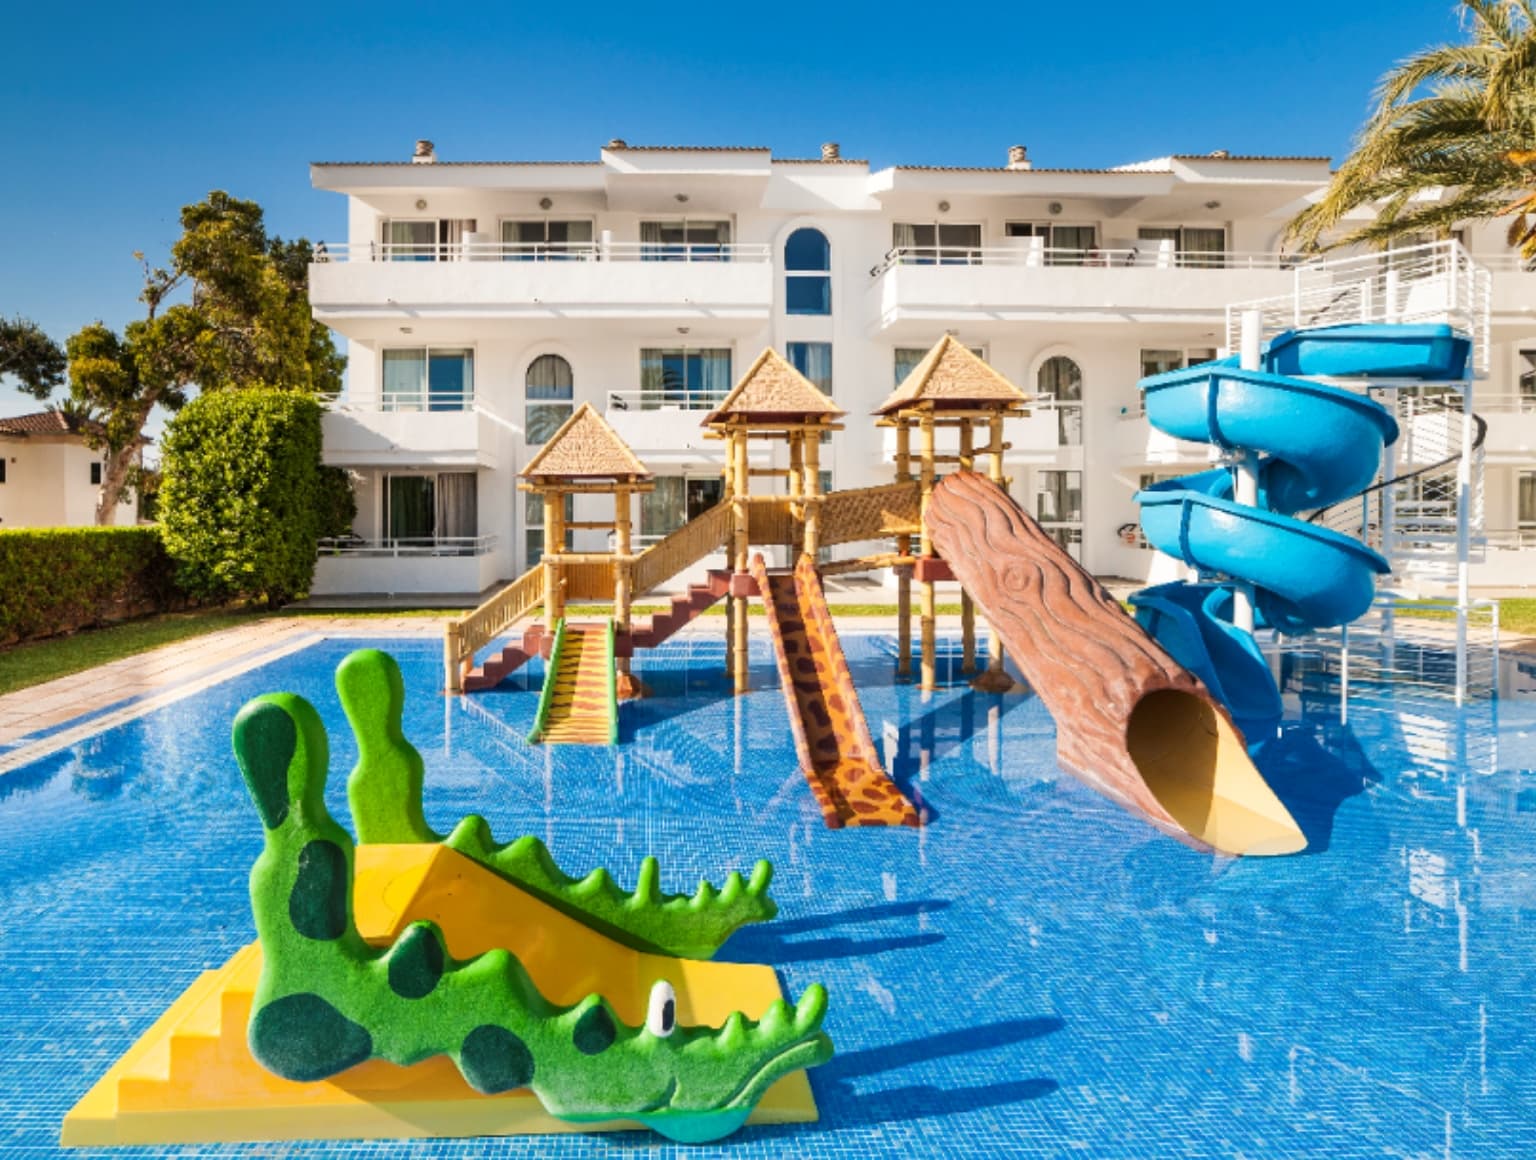 Detail view of the hotel's swimming pool with children's slides.